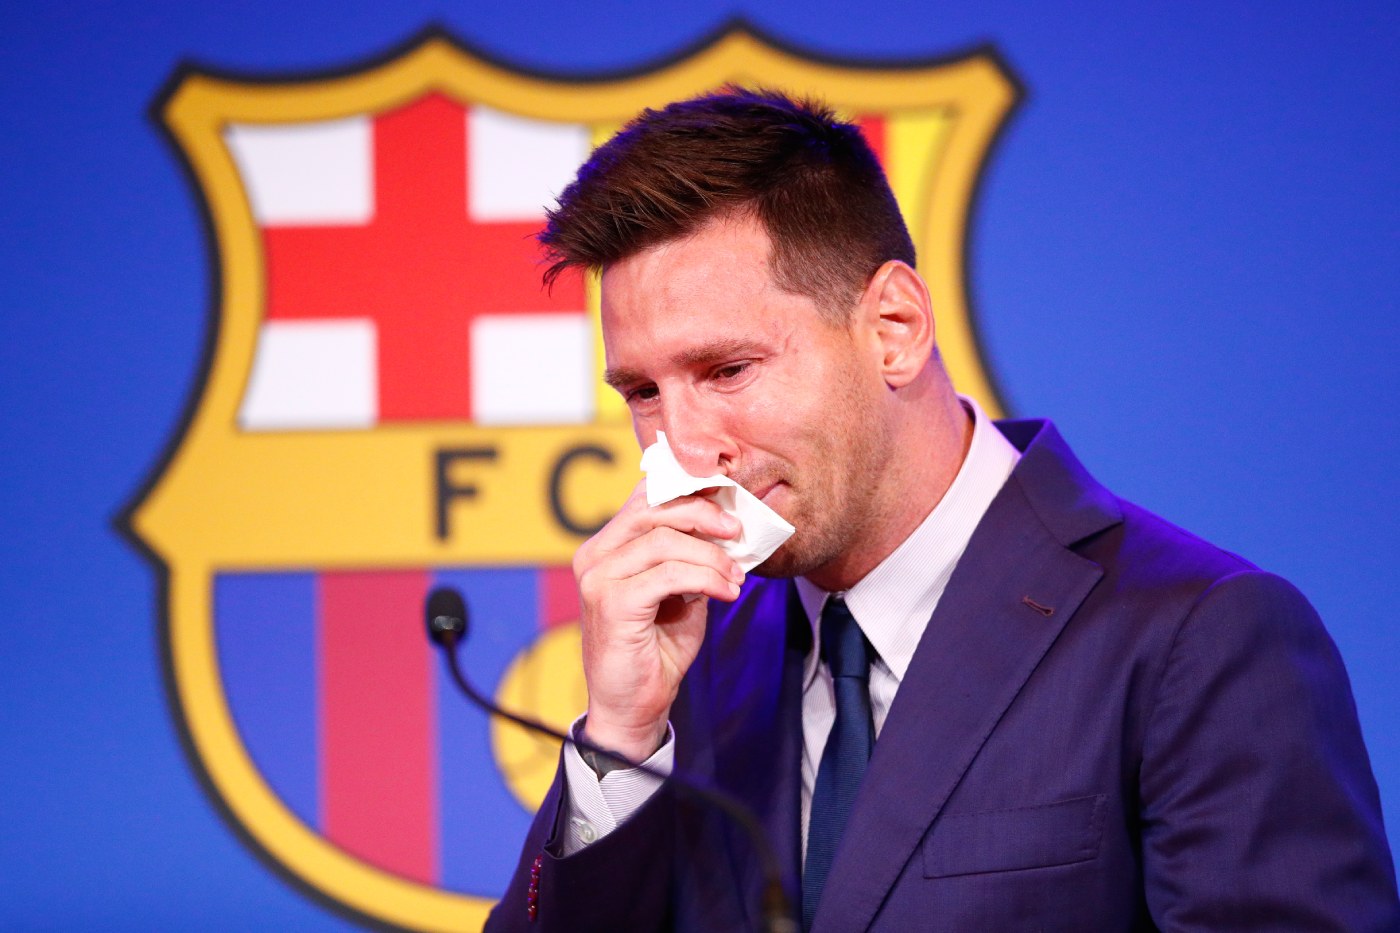 A tearful Lionel Messi